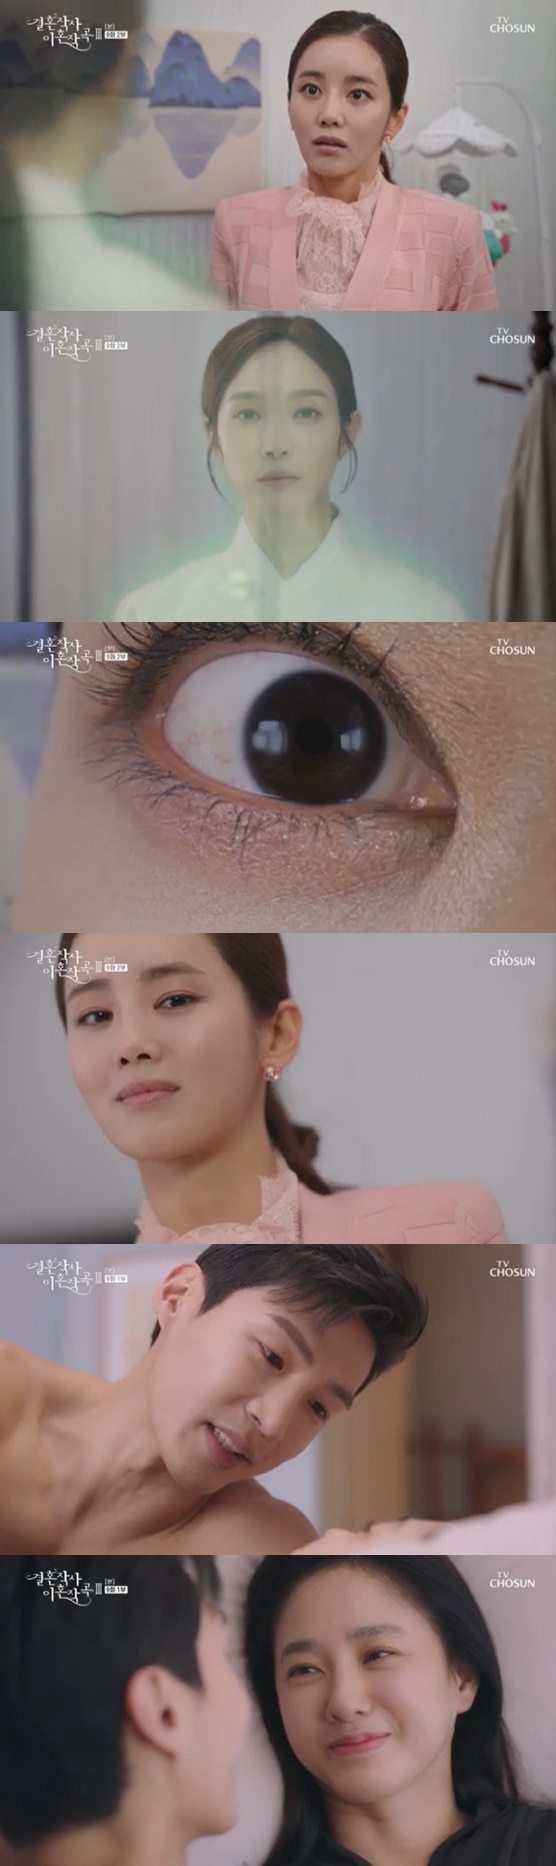 Seoul) = Lee Min-young predicted the unpredictable development of the Ice Sea to Lee Ga-ryeong.On TV Chosun (TV CHOSUN) weekend drama Divorce Composition 3 of Marriage Writing (Im Sung-han), directed by Oh Sang-won Choi Young-soo, and hereinafter Girl Song 3, Safi Young (Park Joo-Mi) and Seo Dong-ma (Boobae) spent a night together.The next morning, Seo Dong-ma expressed his heart to Safi Young and proposed, We are getting married now.Safi Young said, I have done a lot of things in the meantime. Seo Dong-ma said, It is the first time I have been in one mind.Safiyoung asked Seo Dong-ma, who was in a hurry, to speed up my Feeling. The two men decided to inform their families and speed up the marriage process.Shin Ji-ah (Park Seo-kyung) initially opposed the marriage of her mother Safi-young, but said she would meet Seo Dong-ma once after talking to Park Woo-ram (Lim Han-bin).In the villa, Seo Dong-ma prepared food for the mother and daughter of Safi-young, and Jias heart moved with the sincerity of baking meat and preparing tteokbokki.The president of SF Electronics (Han Jin-hee) visited the western part (Moon Seong-ho). The president said, Marry as you want, and all the family will attend. And let the marriage go.I have done nothing wrong with my sister, and she wants to get along with you, she said.However, Park Hae-ryun (played by Jeon No-min) came to the house excitedly when he heard that Lee Si-eun (played by Jeon Soo-kyung) was in the West Ban. Park Hyang-gi (played by Jeon Hye-won) told Park Hae-ryun, I can not accept it.I do not want to eat, and I do not want to leave. Do not interfere with my cheer. Ishieun said, Take your own spirit and live. Since then, Ishieun has heard from the Western Ban that Seo Dong-ma and Safi-young are married, and Ishi-eun, who is surprised by this, asked the whole story at the place where Bu Hye-ryong (Lee, for example) and Safi-young are.I did not get a hit, I was in vain again, said Buhye-ryong, who said, I am not a comedy, I am afraid of you.When he returned home, he blamed himself for what he was missing.Buhye-ryong headed to the house of Judge Hyun (Kang Shin-hyo) to inform him that he was watching the original marriage of Lee Min-young.After that, the soul of Songwon appeared behind the child who was alone, and gave surprise to the child.On the other hand, Girl Song 3 is a story about unimaginable misfortune that has been encountered by three charming heroines in their 30s, 40s and 50s.It airs every Saturday and Sunday at 9 p.m.